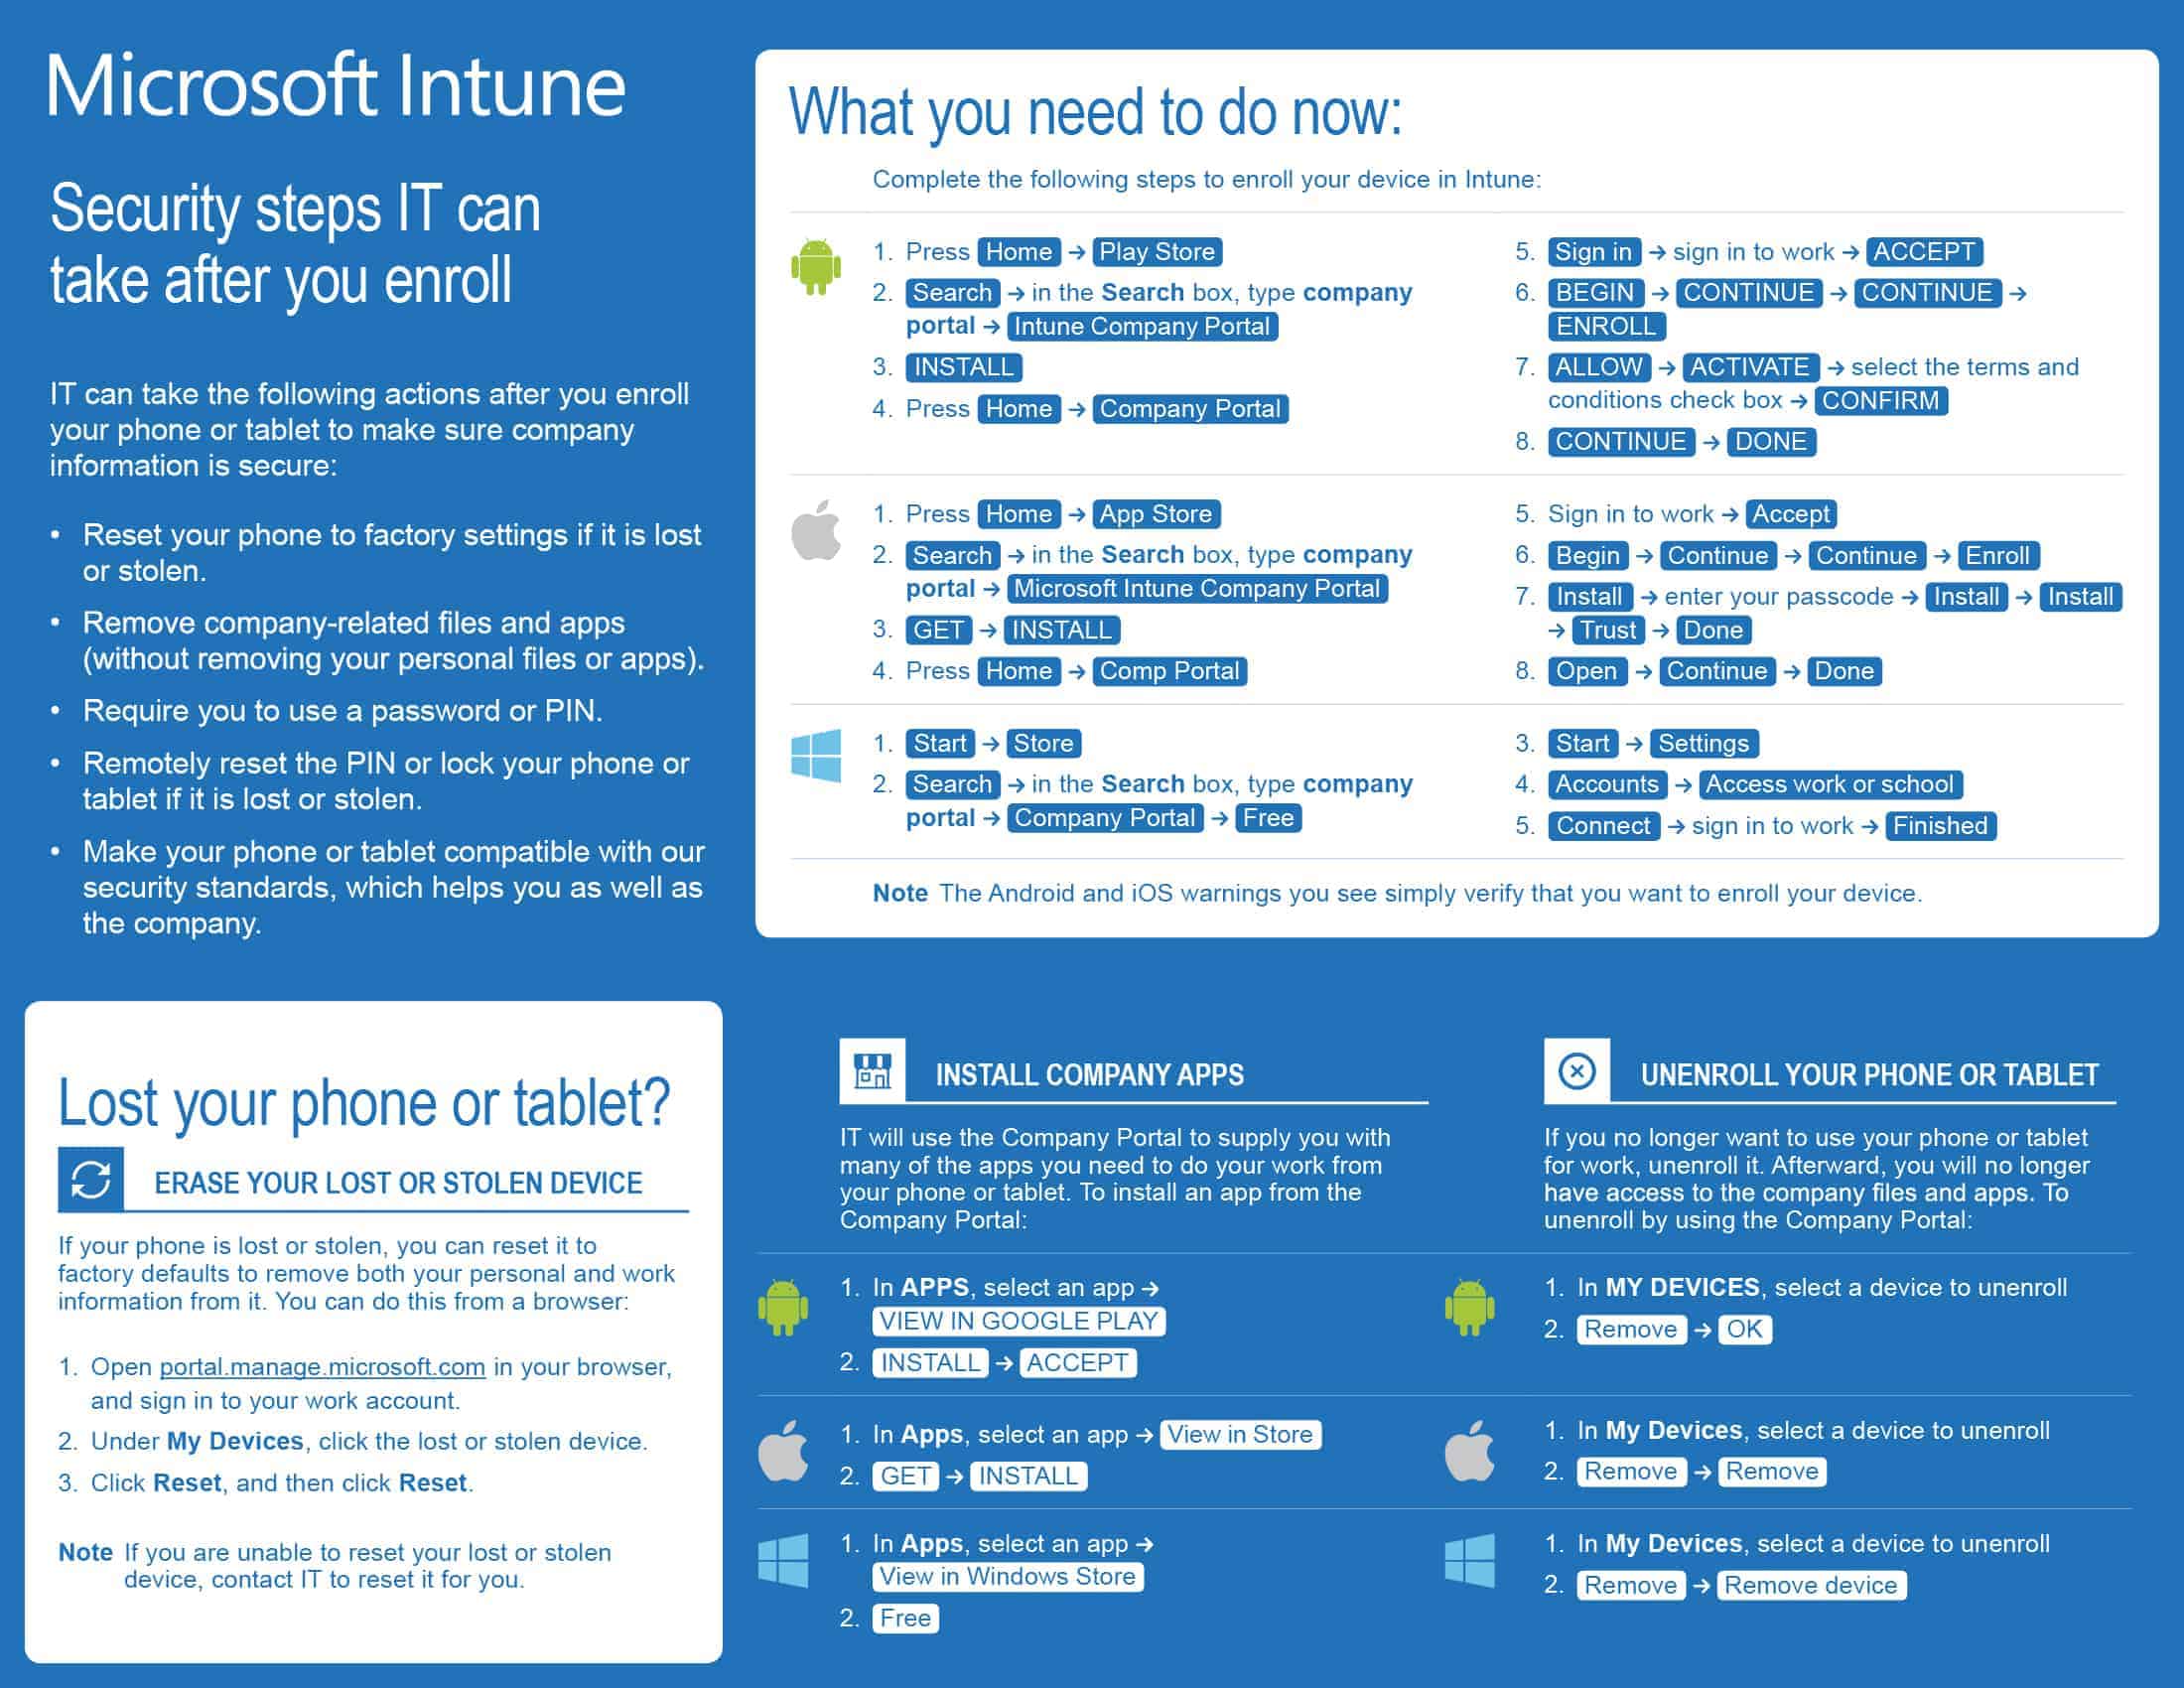 Microsoft Intune end-user handout back page